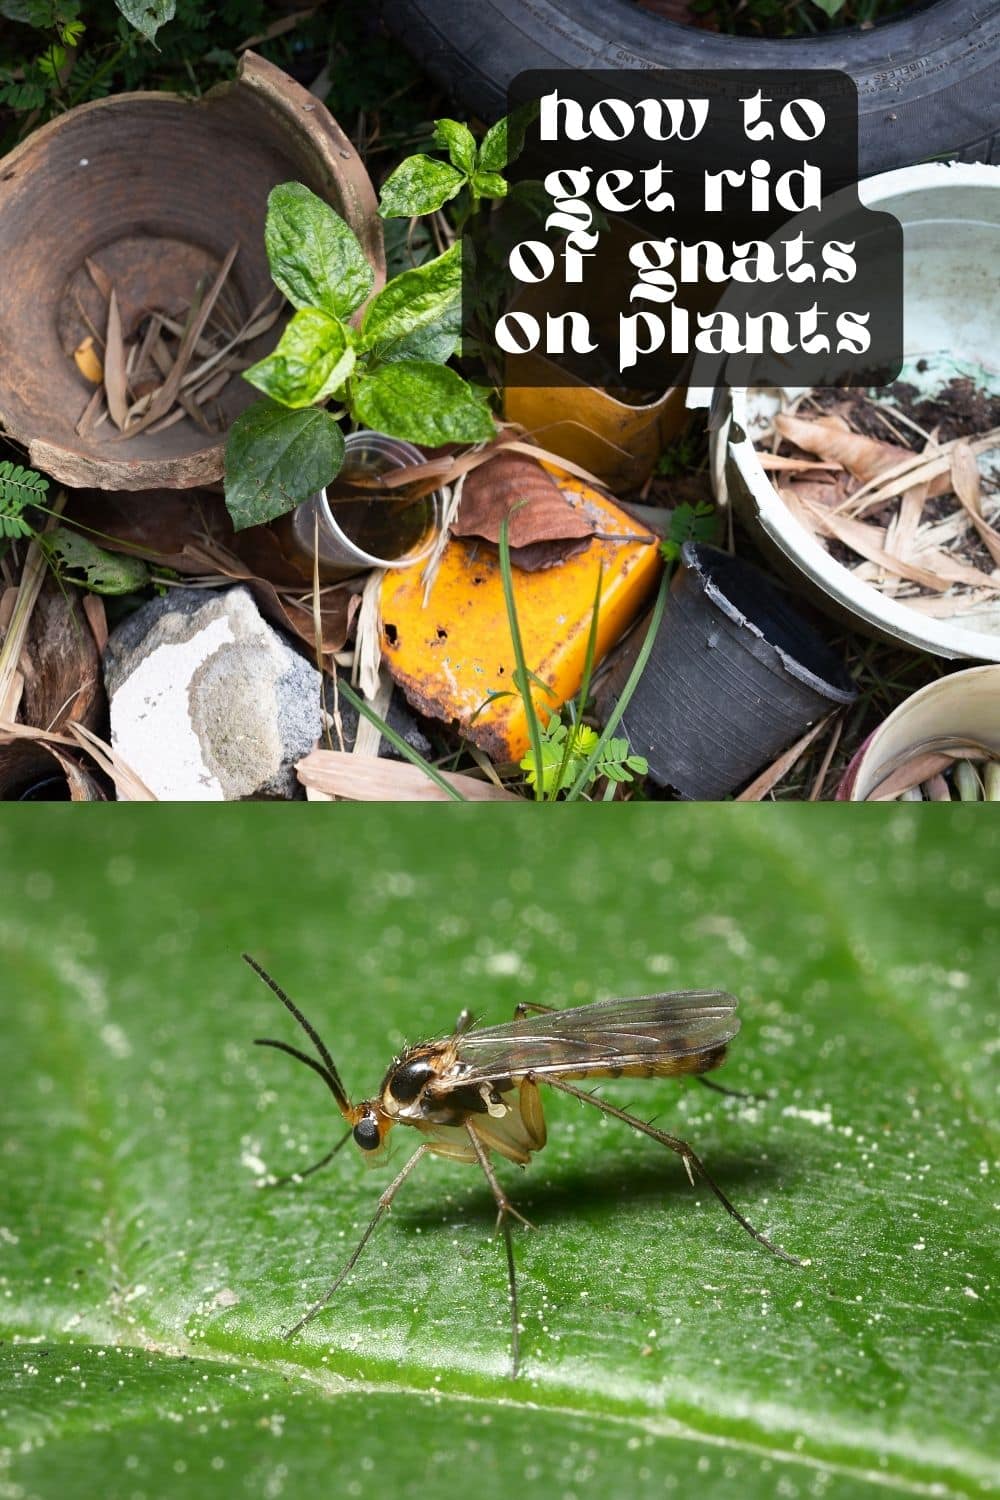 Fungus gnats are small, pesky insects that can be a nuisance to humans and plants. While gnats only have a short life cycle, they reproduce quickly, which makes getting rid of them tricky. If you're currently dealing with a gnat infestation, you're likely wondering what caused it in the first place. Could it be your beloved plants? In this article, we explore the connection between plants and gnats. We'll discuss if it is your plants that attract gnats, as well as tips on how to prevent and get rid of them.